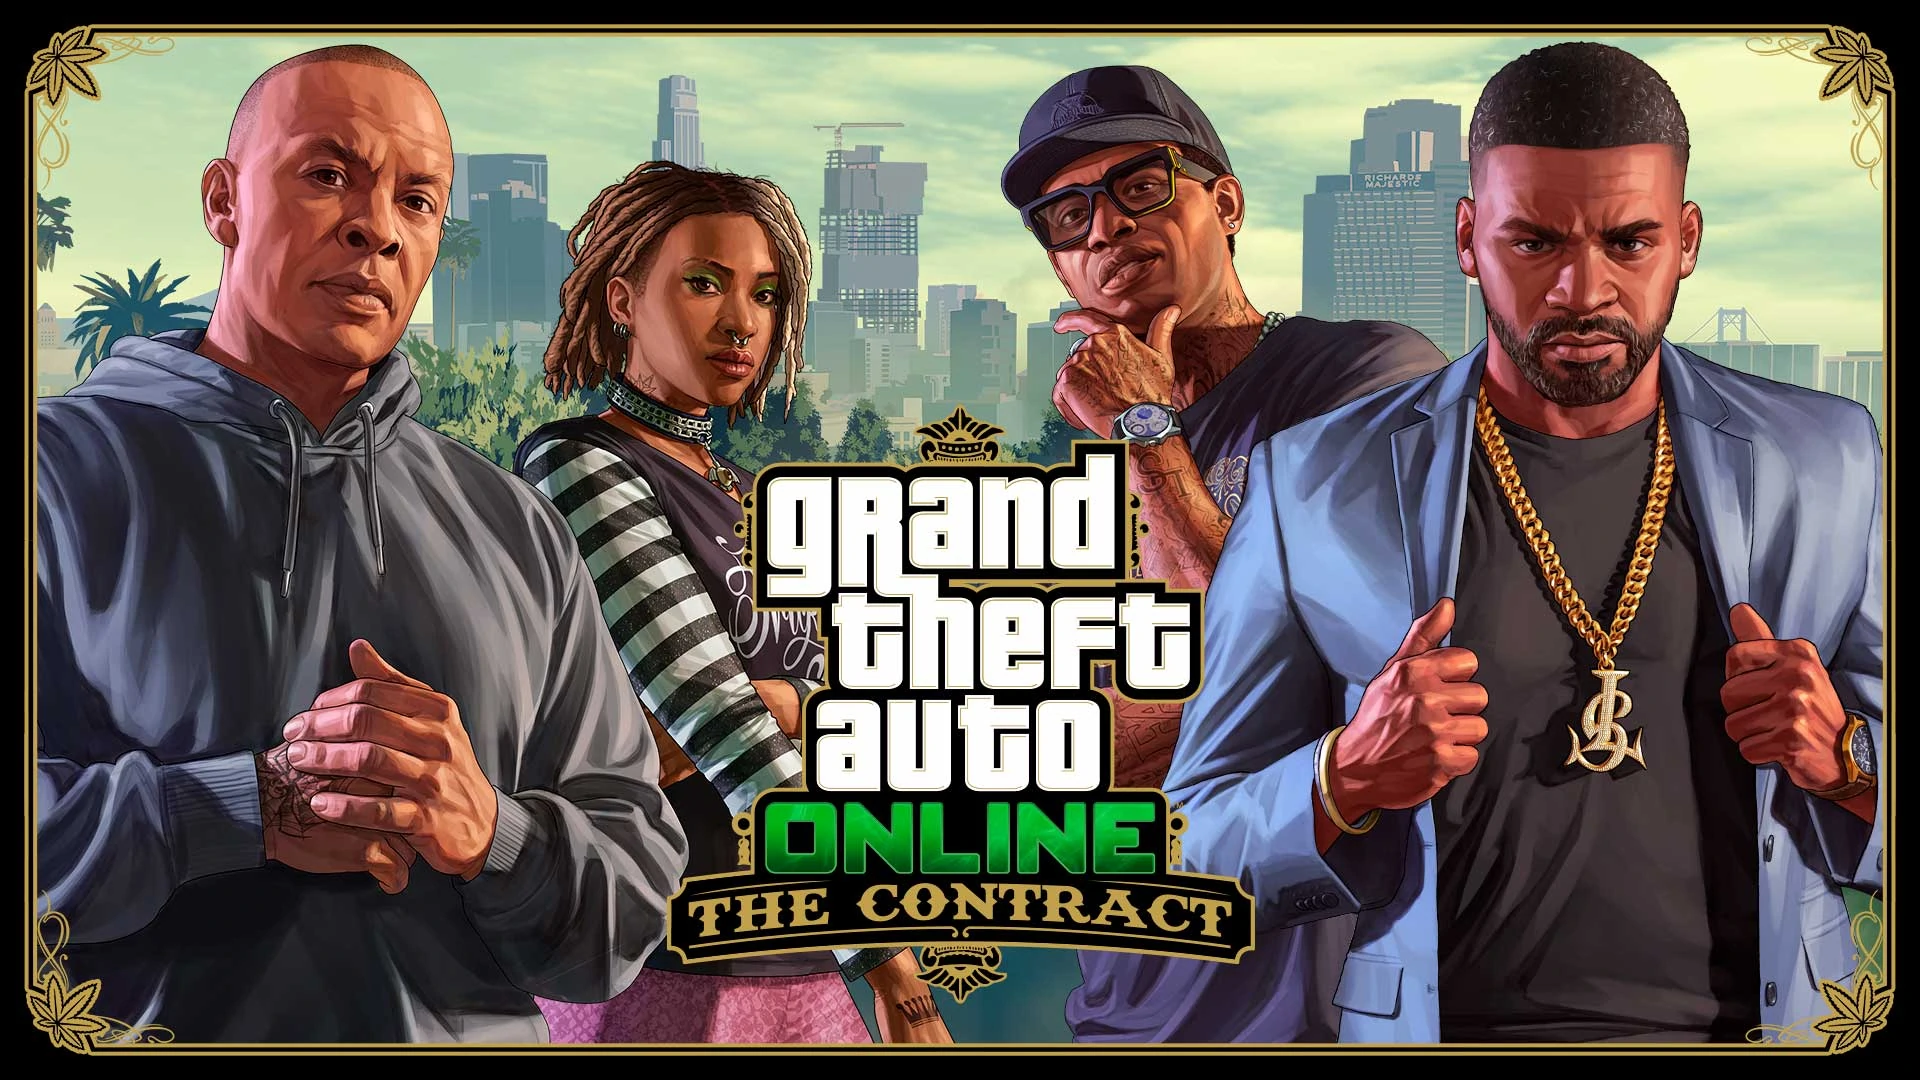 GTA 5, GTA Online, Dr. Dre, The Contract